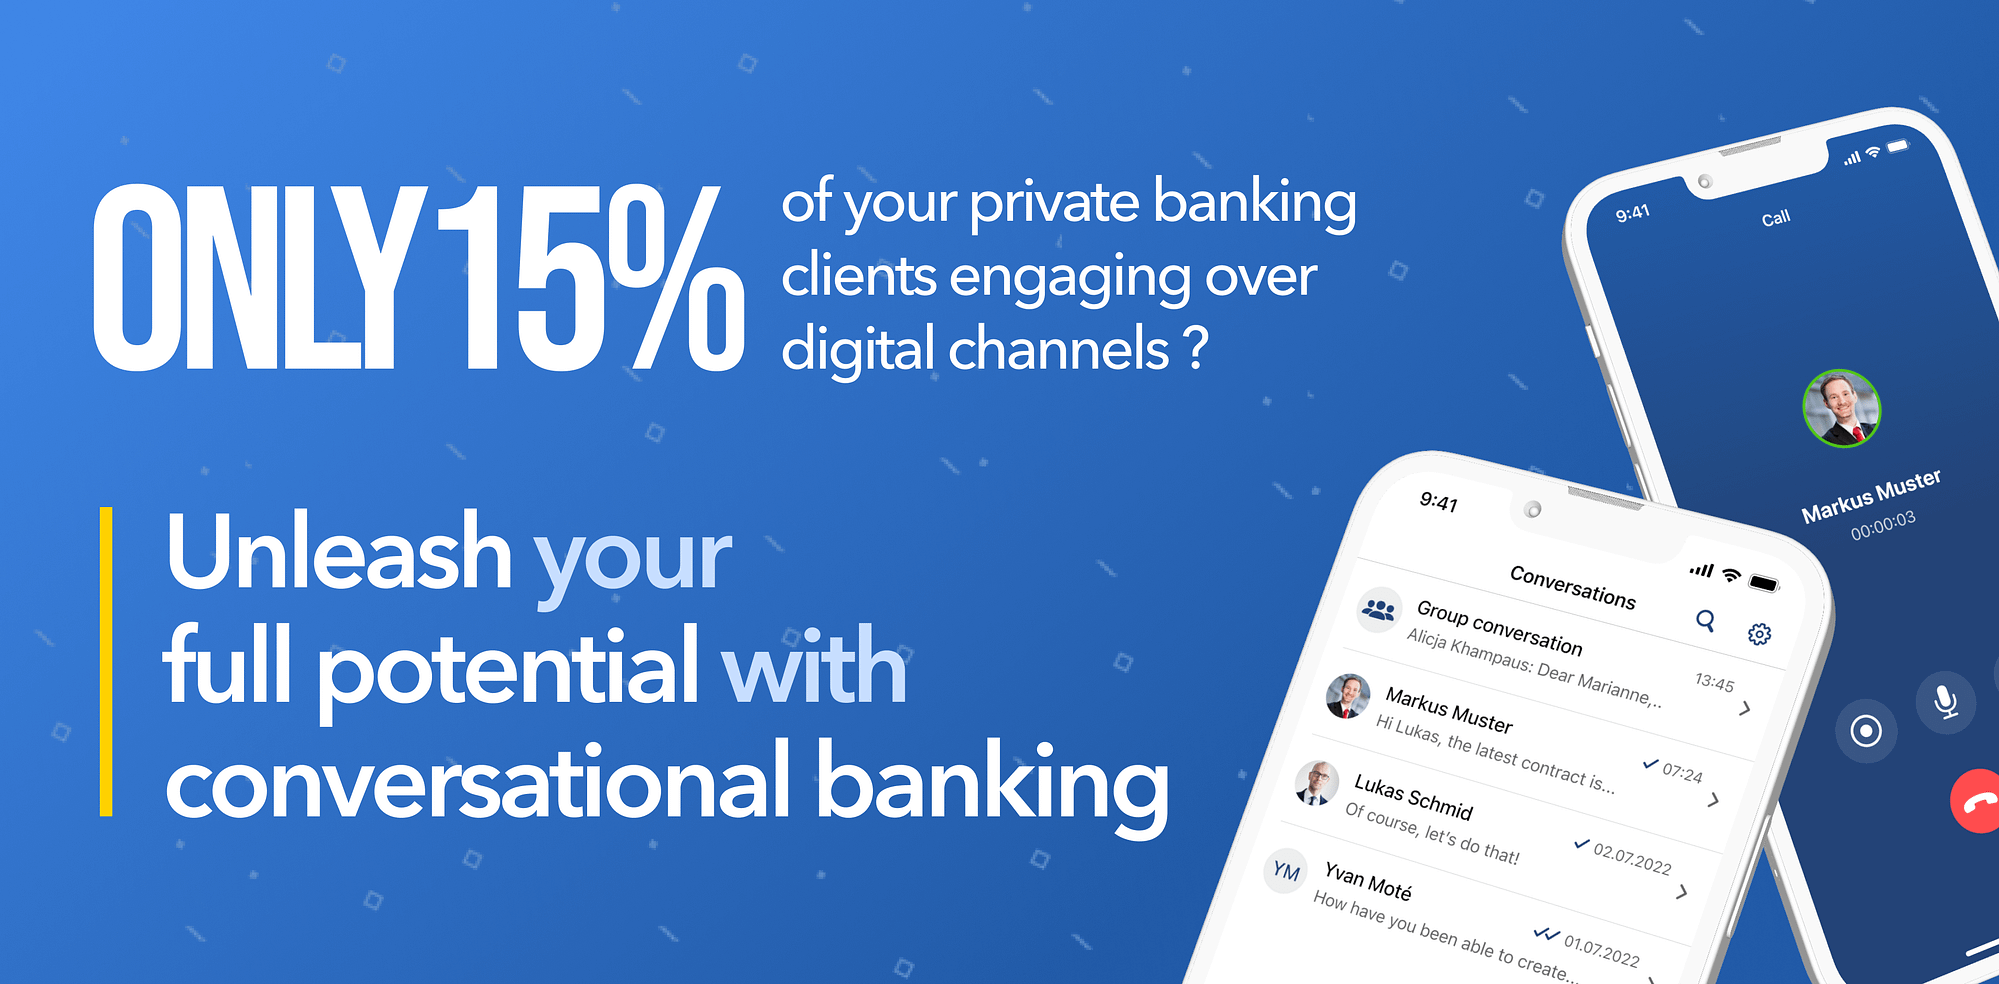 Unleash your full potential with conversational banking!